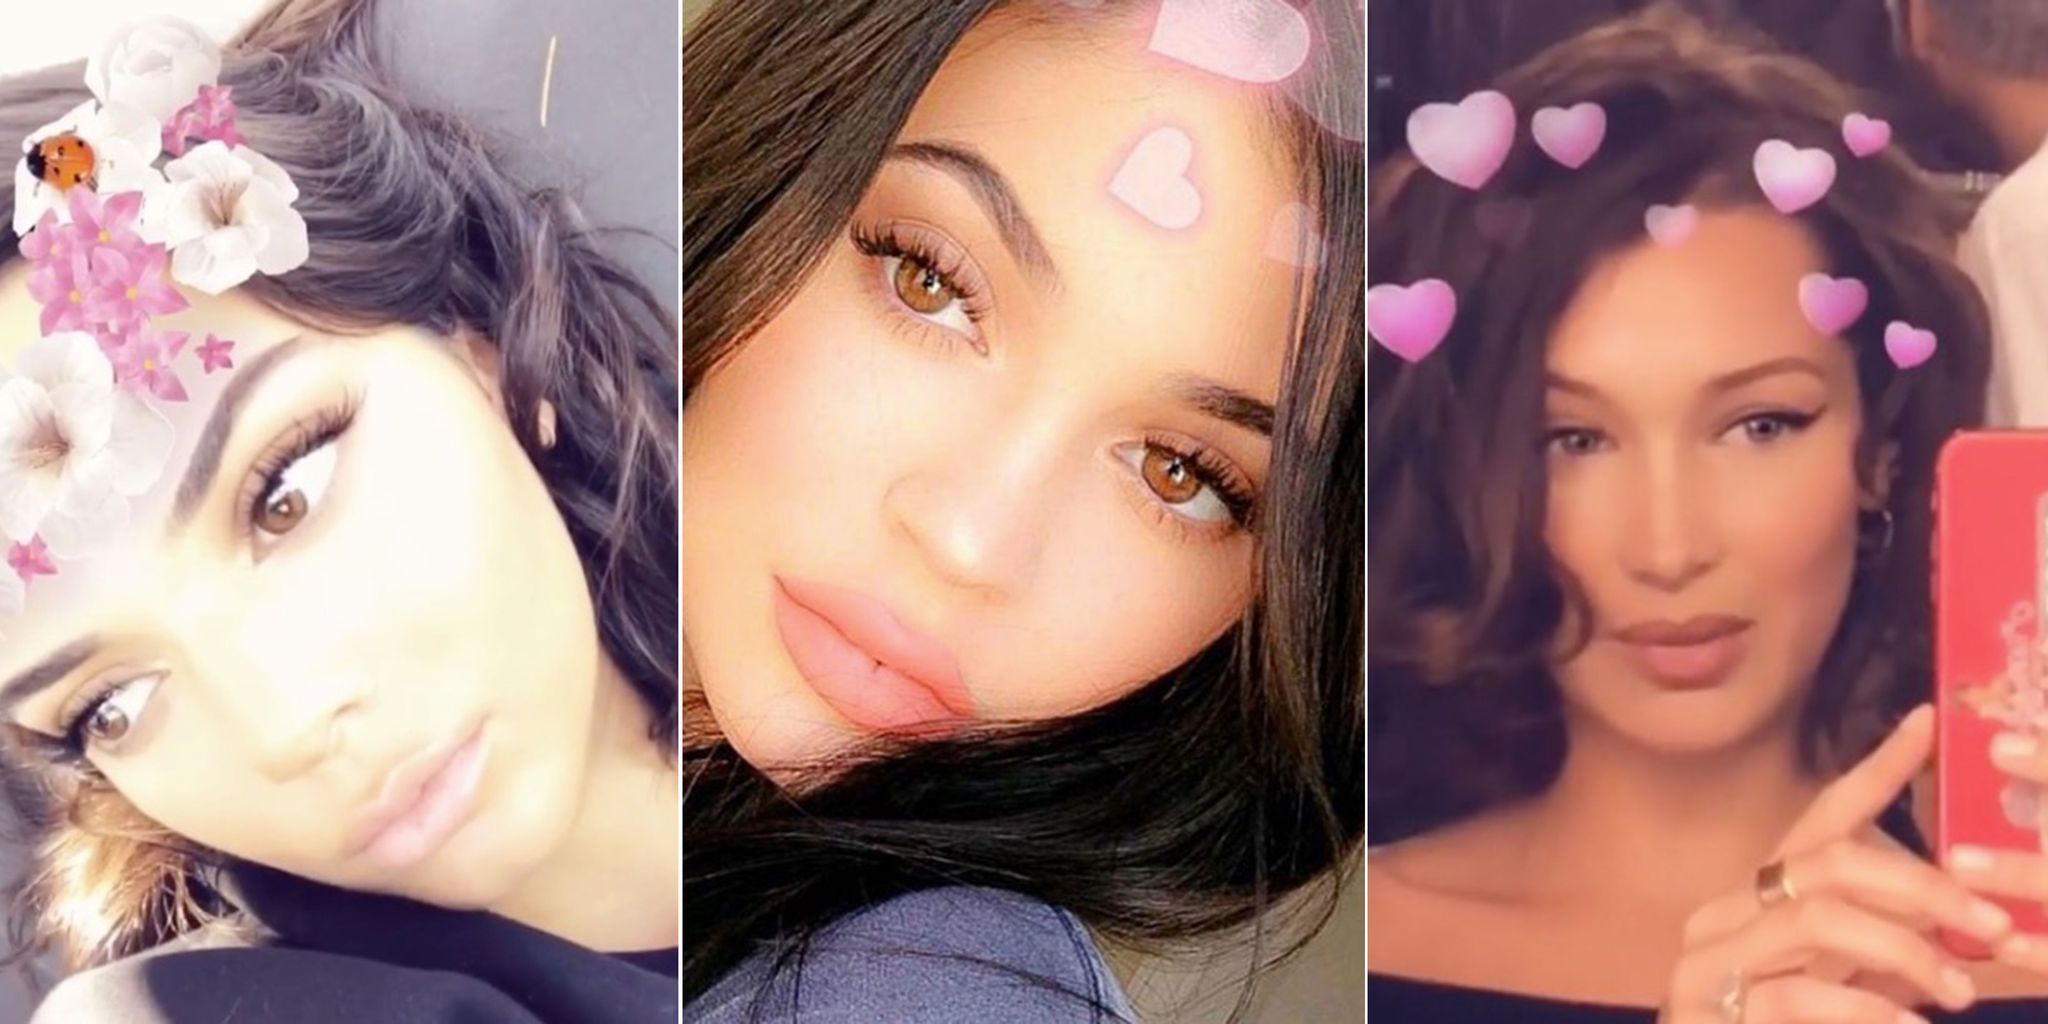 People Now Want to Look Like Their Filtered Snapchat Selfies